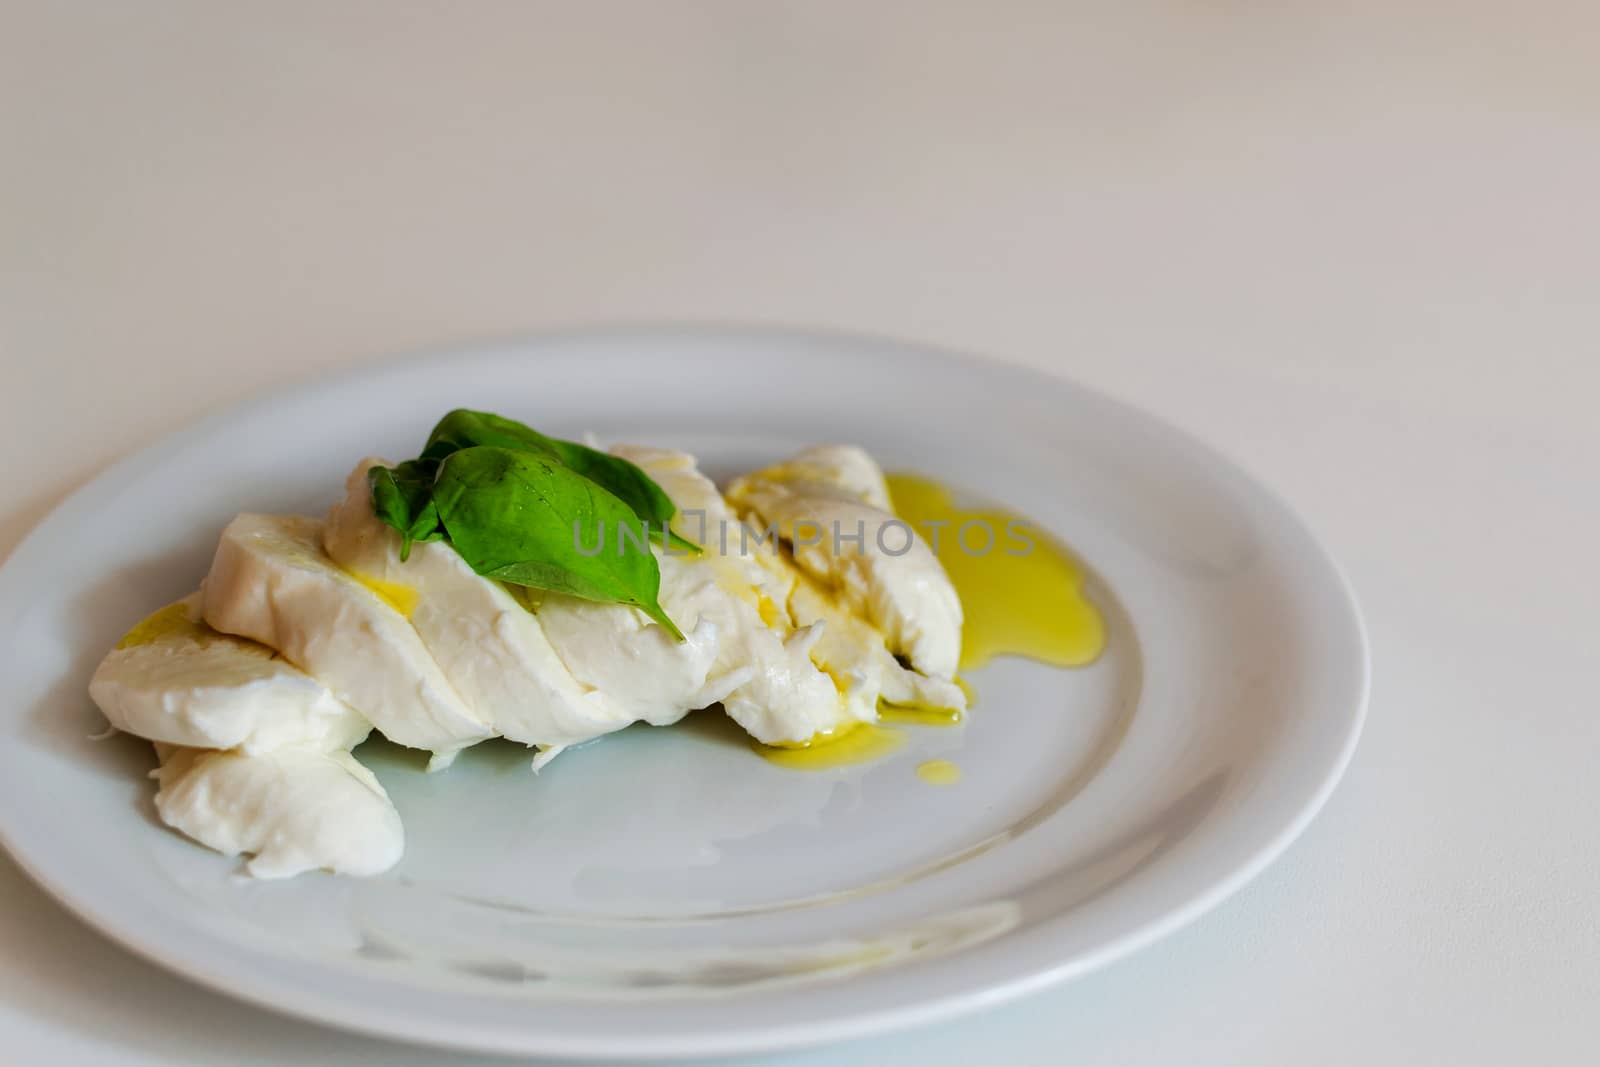 Slices of italian mozzarella with leaves of basil and olive oil by enrico.lapponi